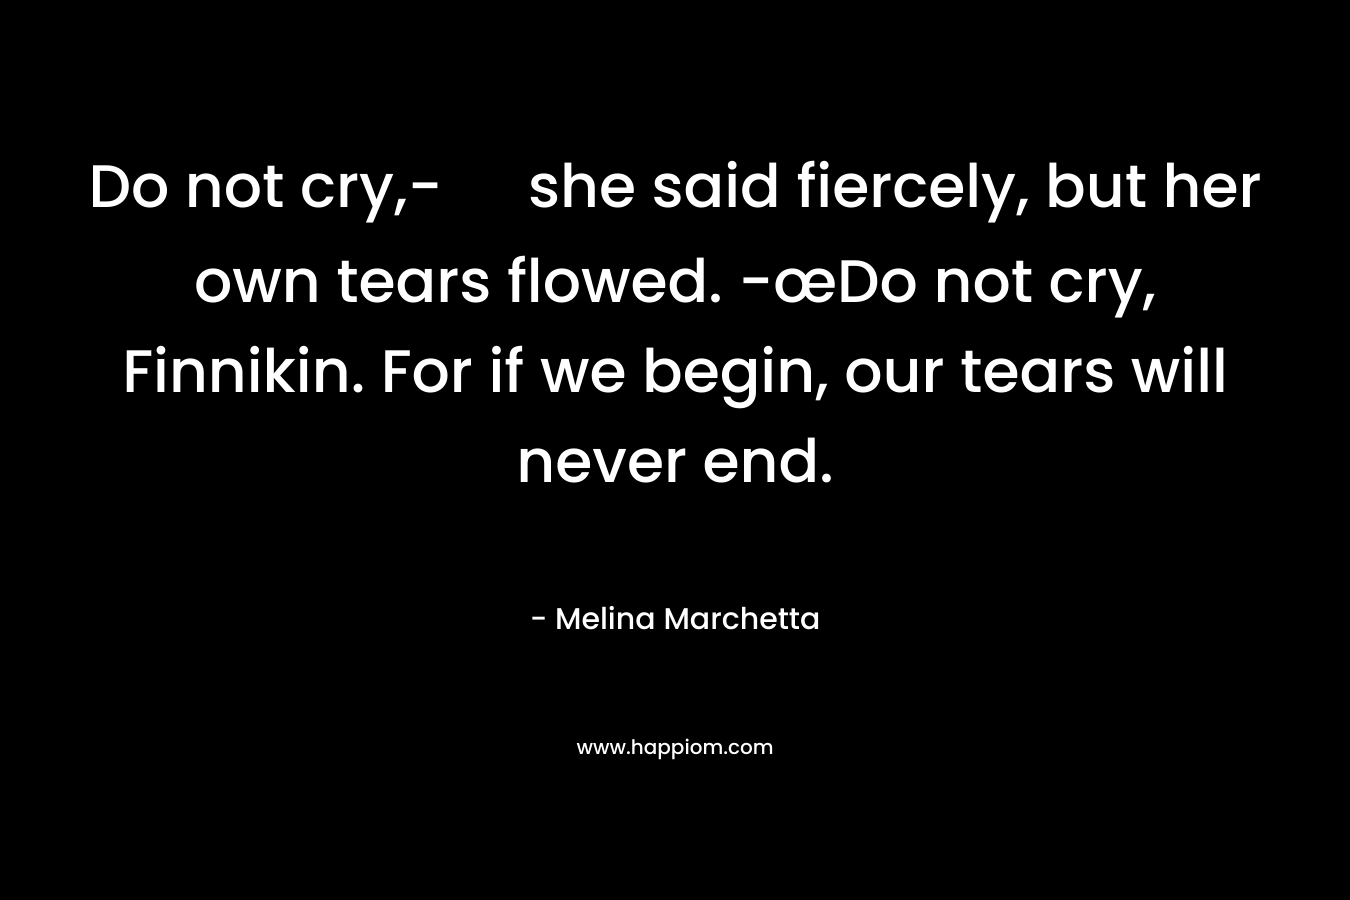 Do not cry,- she said fiercely, but her own tears flowed. -œDo not cry, Finnikin. For if we begin, our tears will never end.